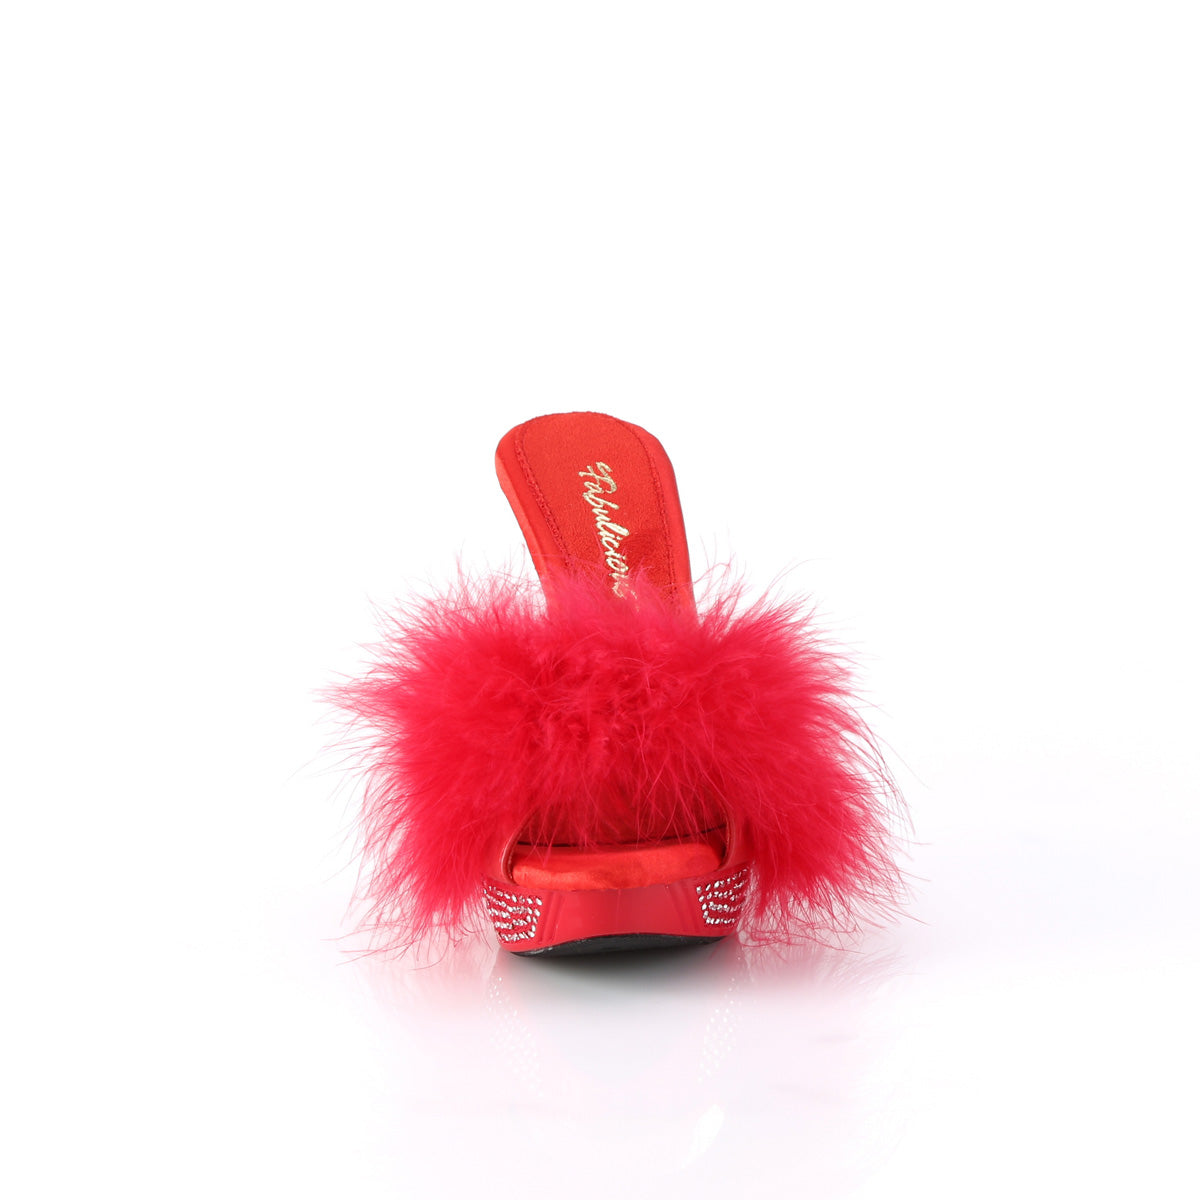 ELEGANT-401F Fabulicious Red Marabou-Faux Leather/Red Shoes [Sexy Shoes]